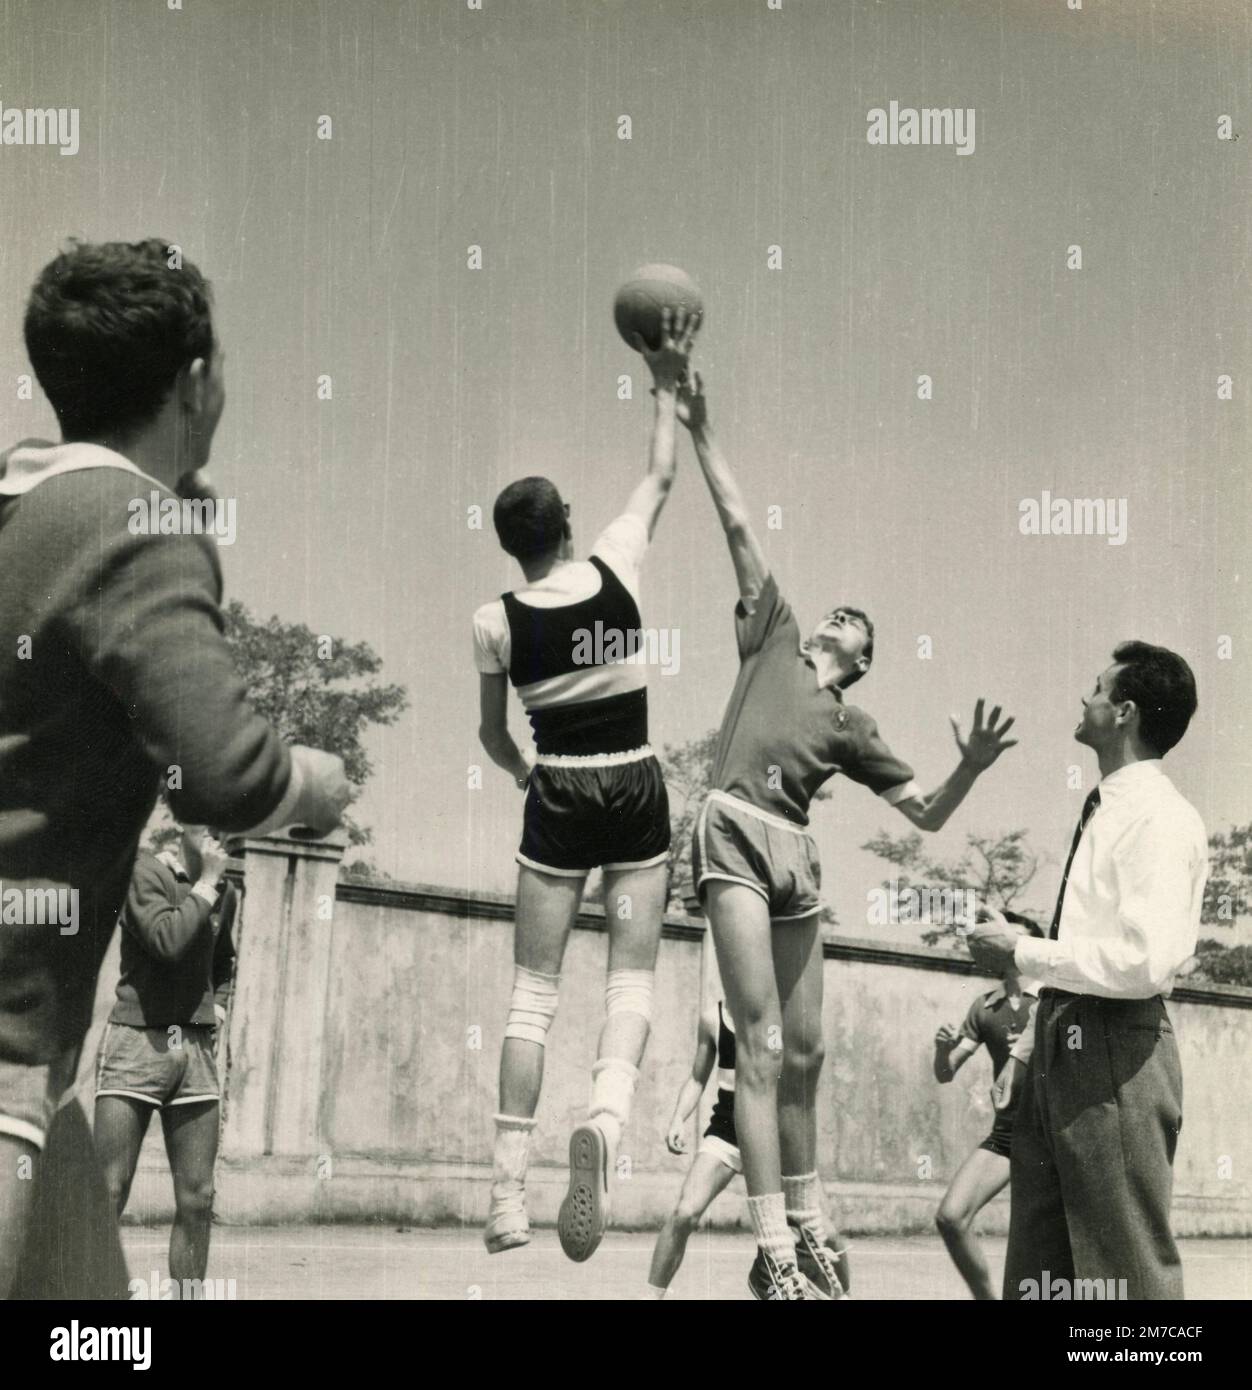 Youngsters playing amateur basketball, Italy 1950s Stock Photo